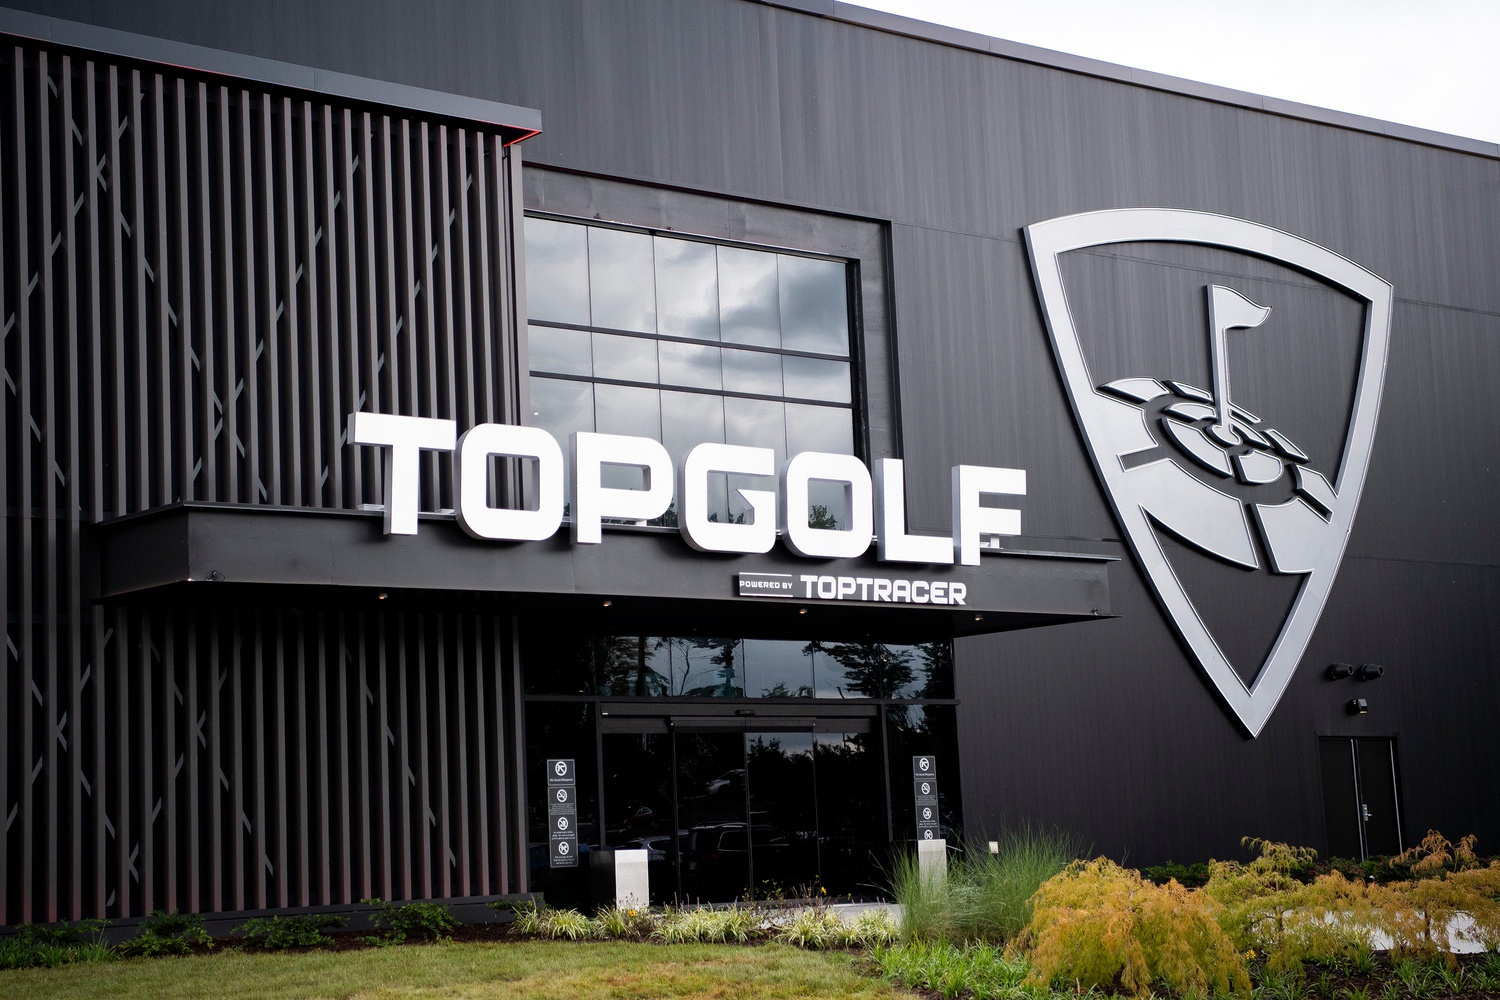 The entrance to the new Topgolf in Farragut, Tennessee on Thursday, August 11, 2022.